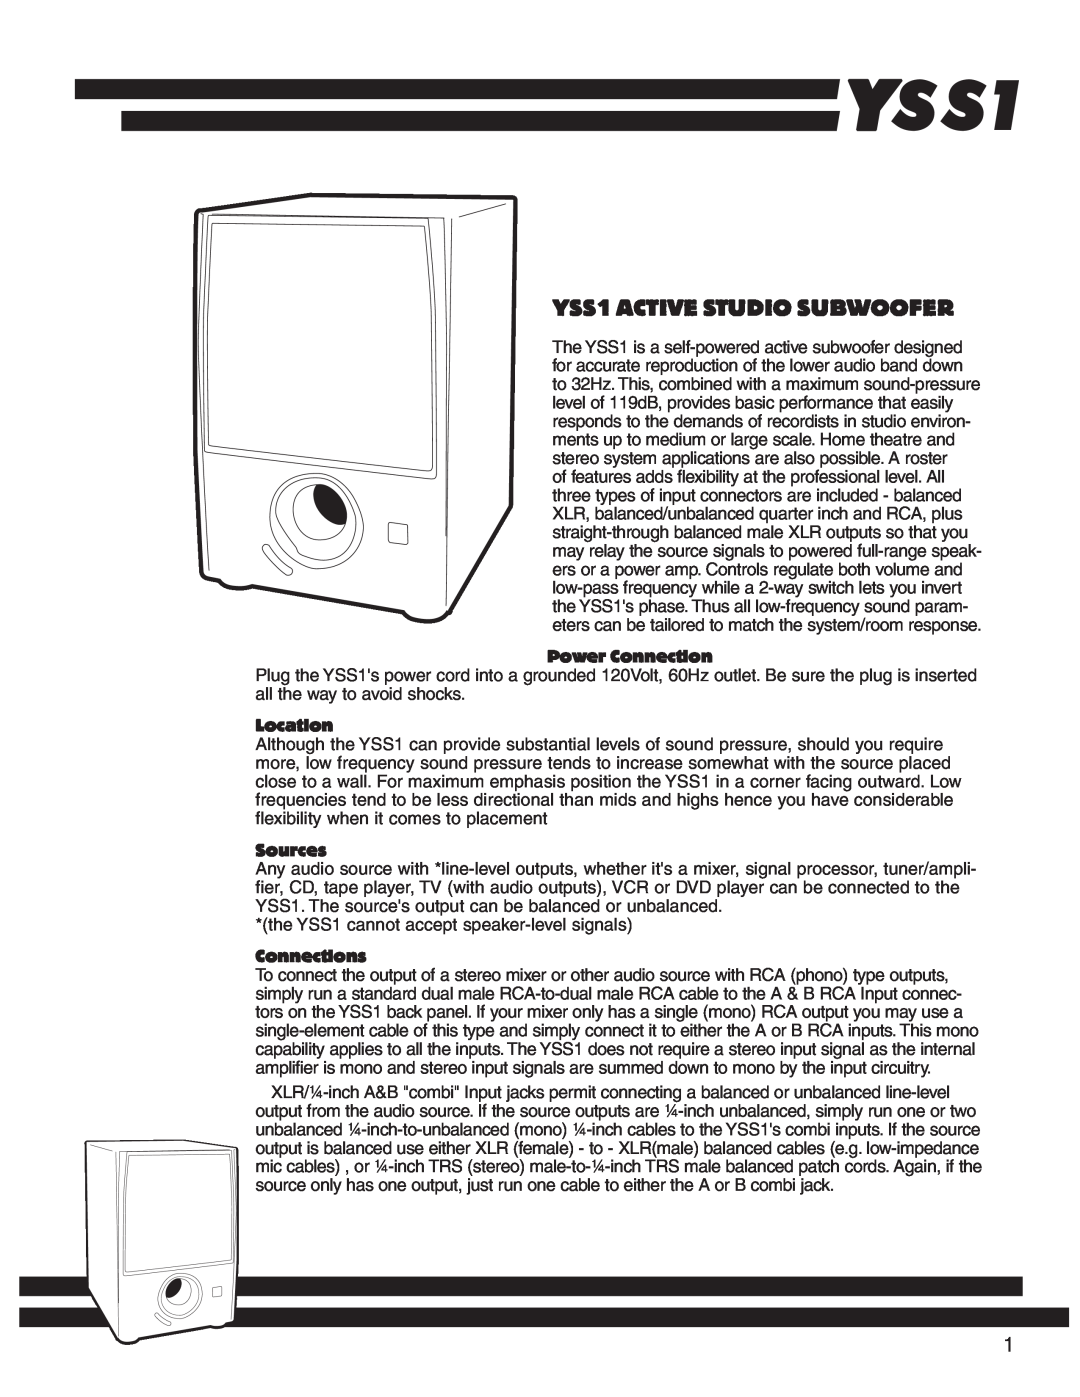 Yorkville Sound owner manual YSS1 ACTIVE STUDIO SUBWOOFER, Power Connection, Location, Sources, Connections 